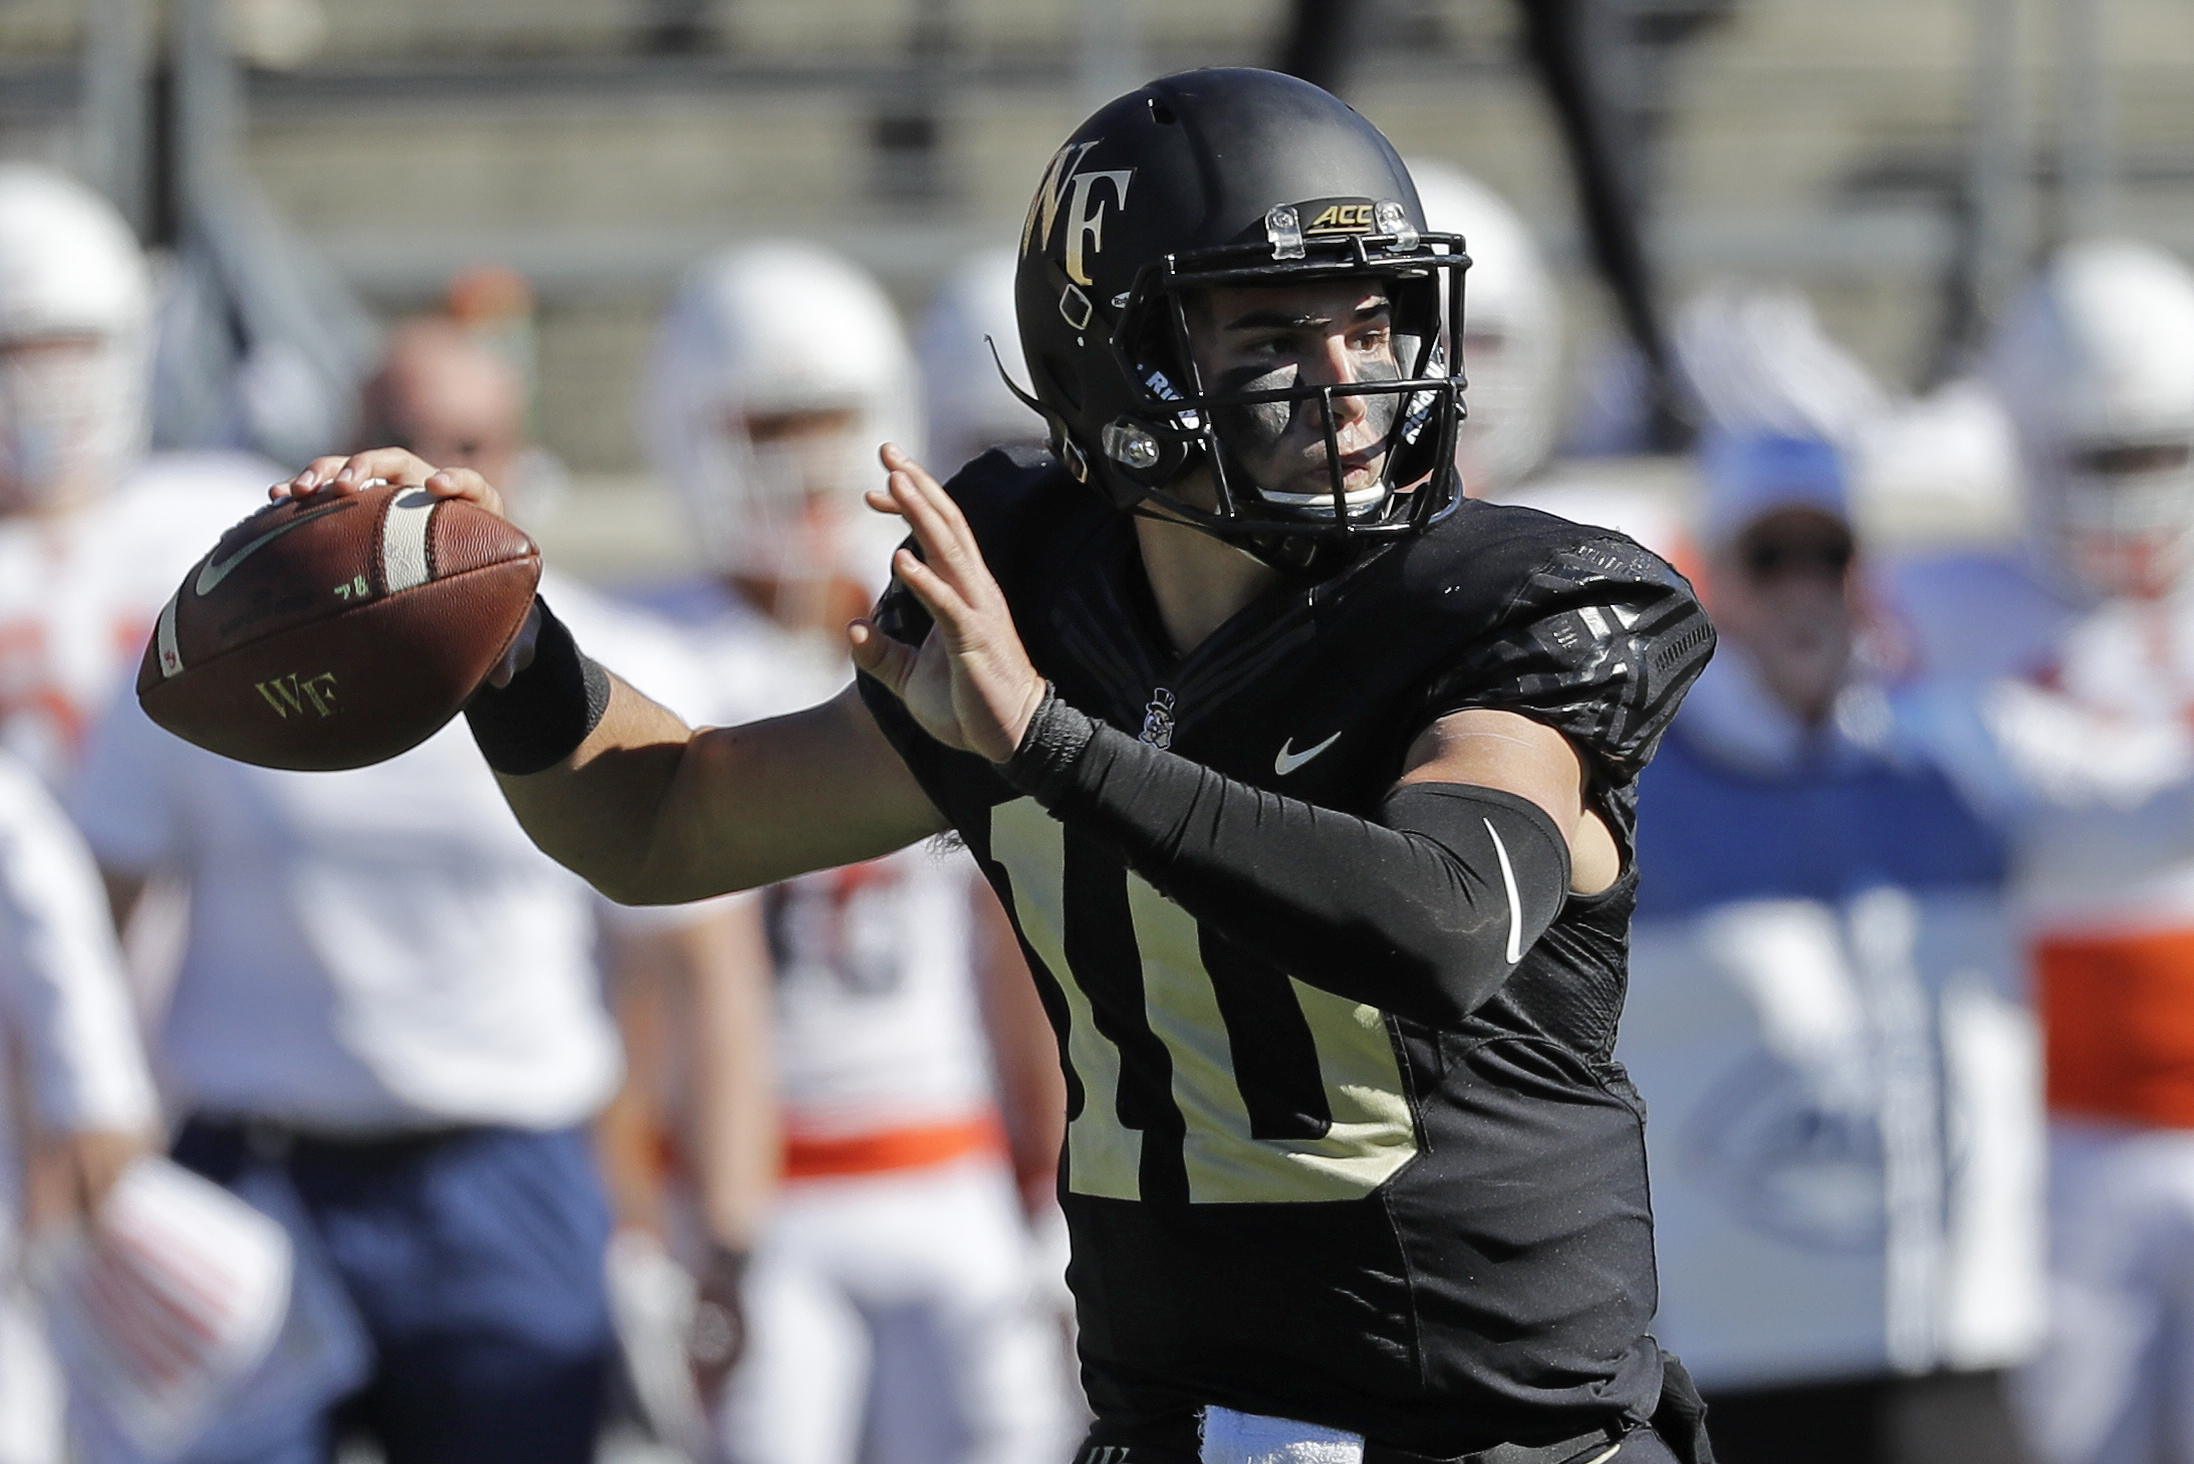 Wake Forest QB Hartman out for season with leg injury